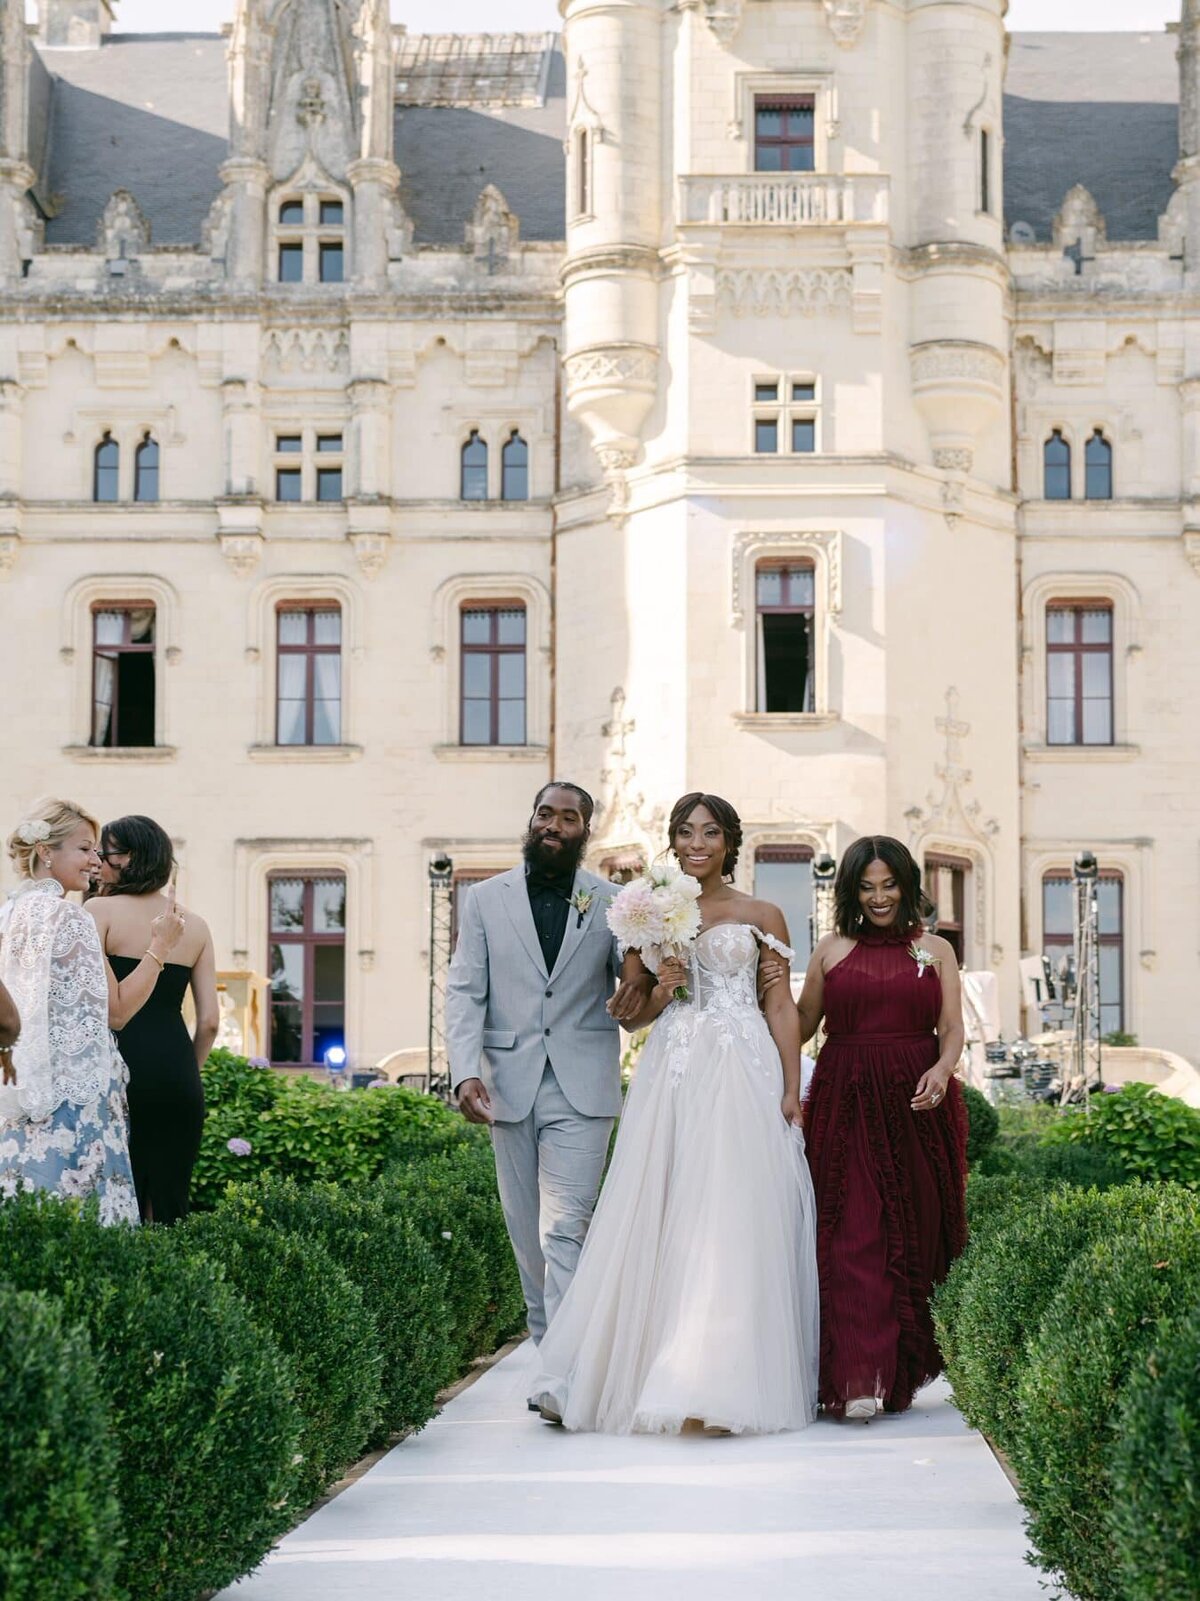 Serenity Photography - Wedding in France chateau 82